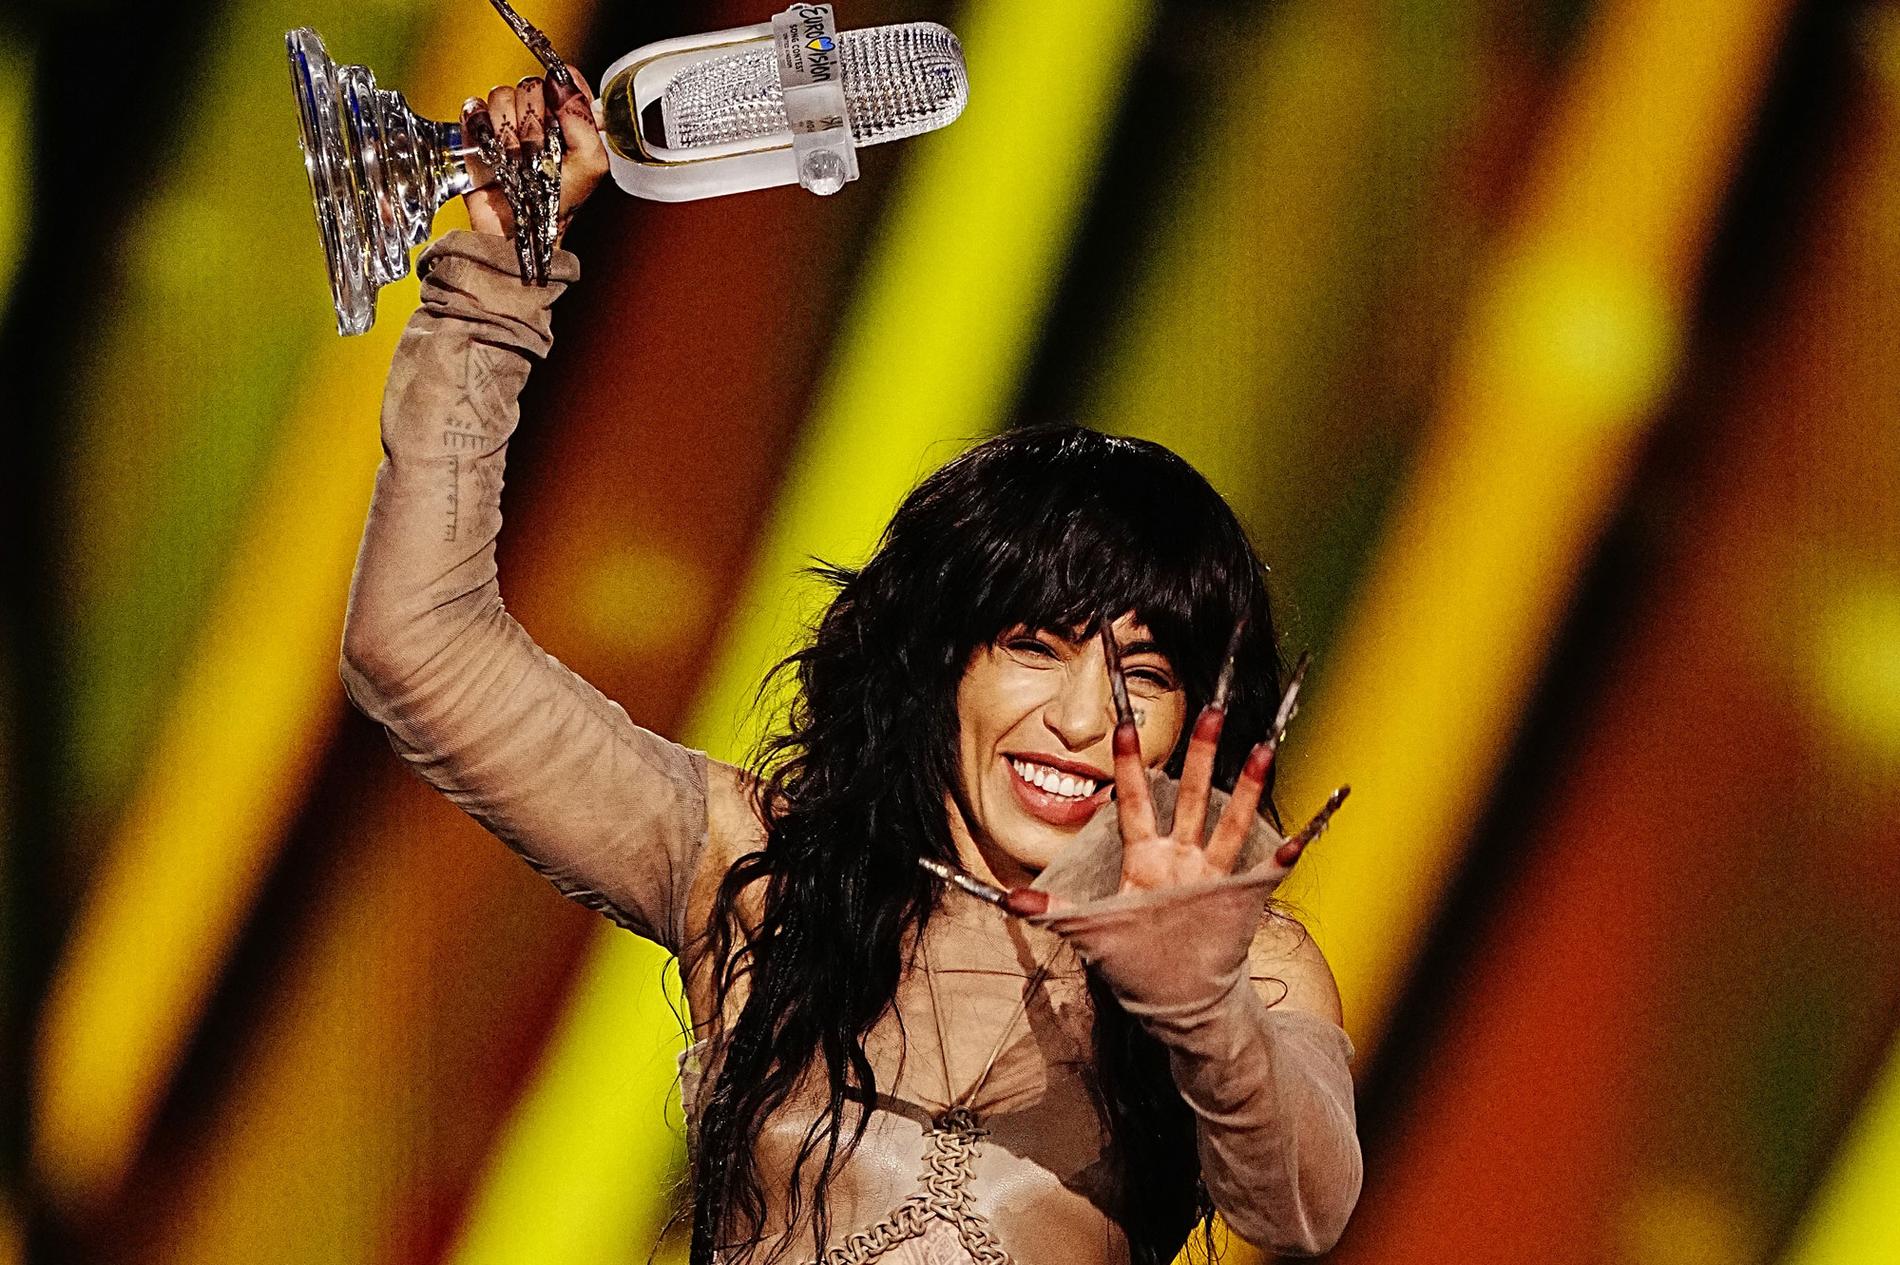 More than a million NRK viewers caught Loreen’s Eurovision win